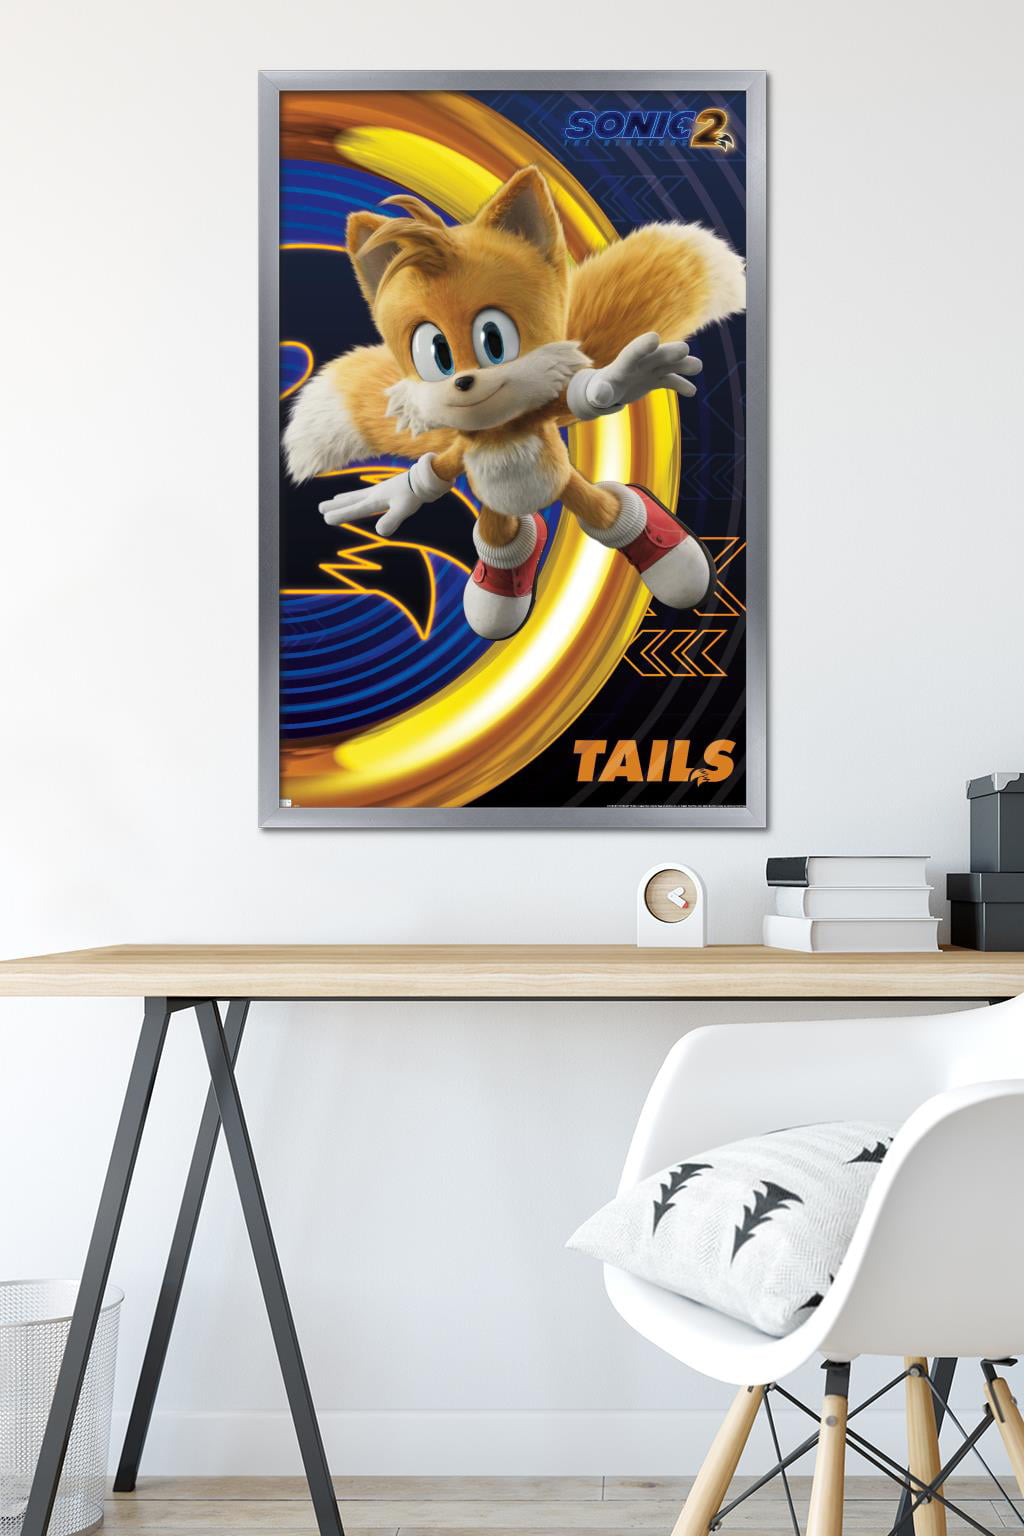 Sonic The Hedgehog 2 - Tails Wall Poster, 22.375